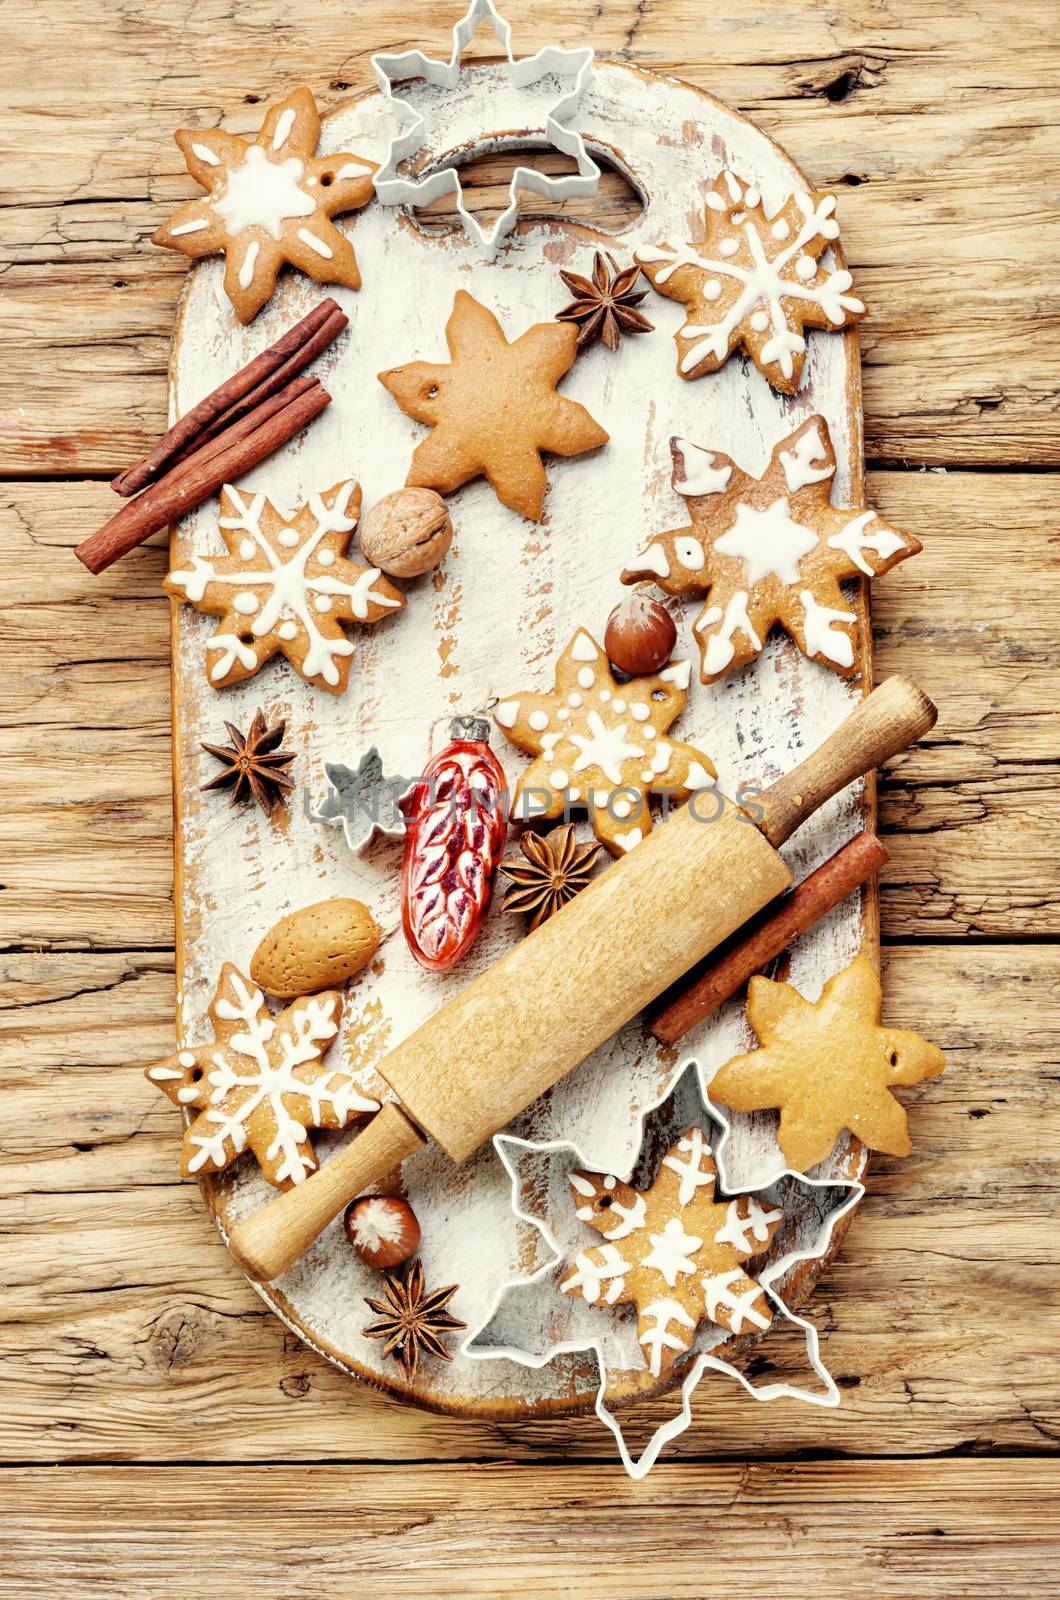 Christmas gingerbread cookies with festive decoration.Christmas cookie on a wooden background